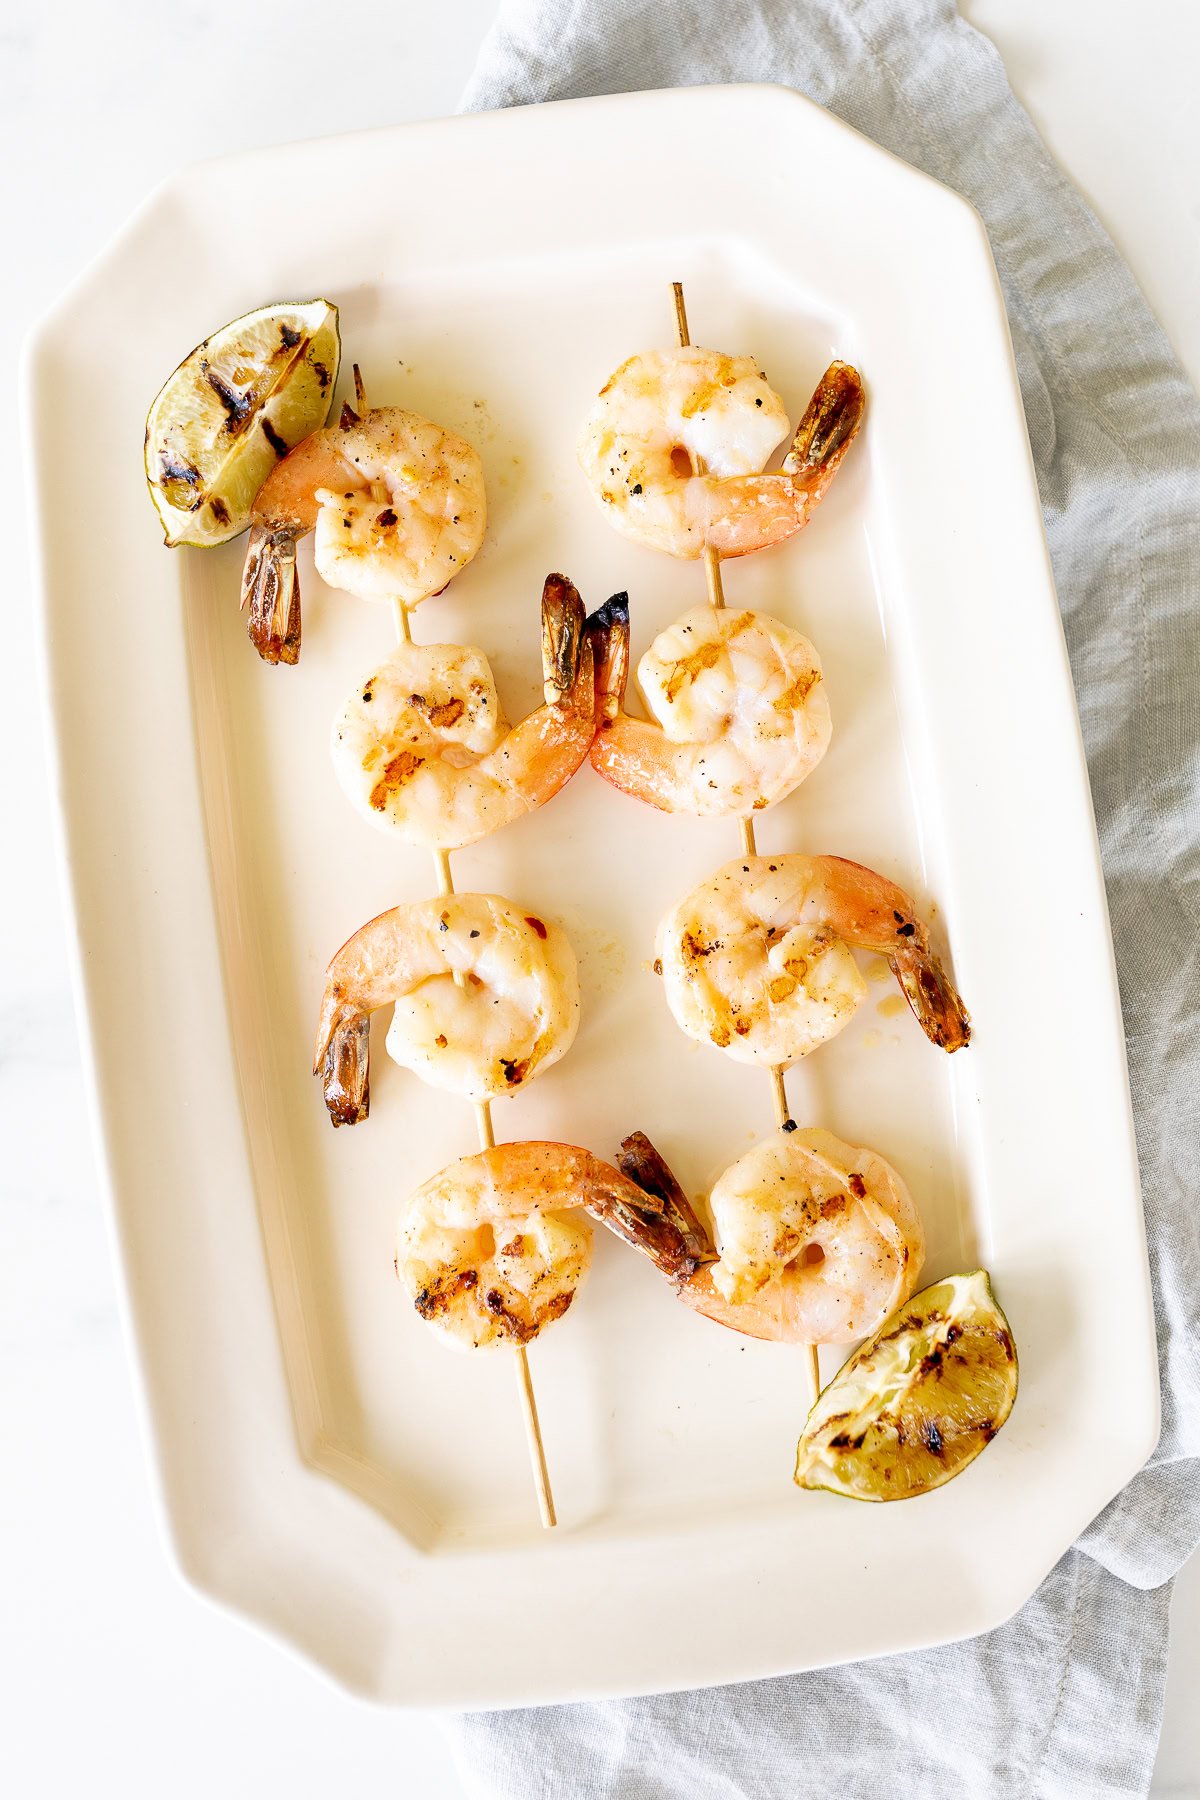 Grilled tequila lime shrimp skewers with lemon wedges on a rectangular white plate.